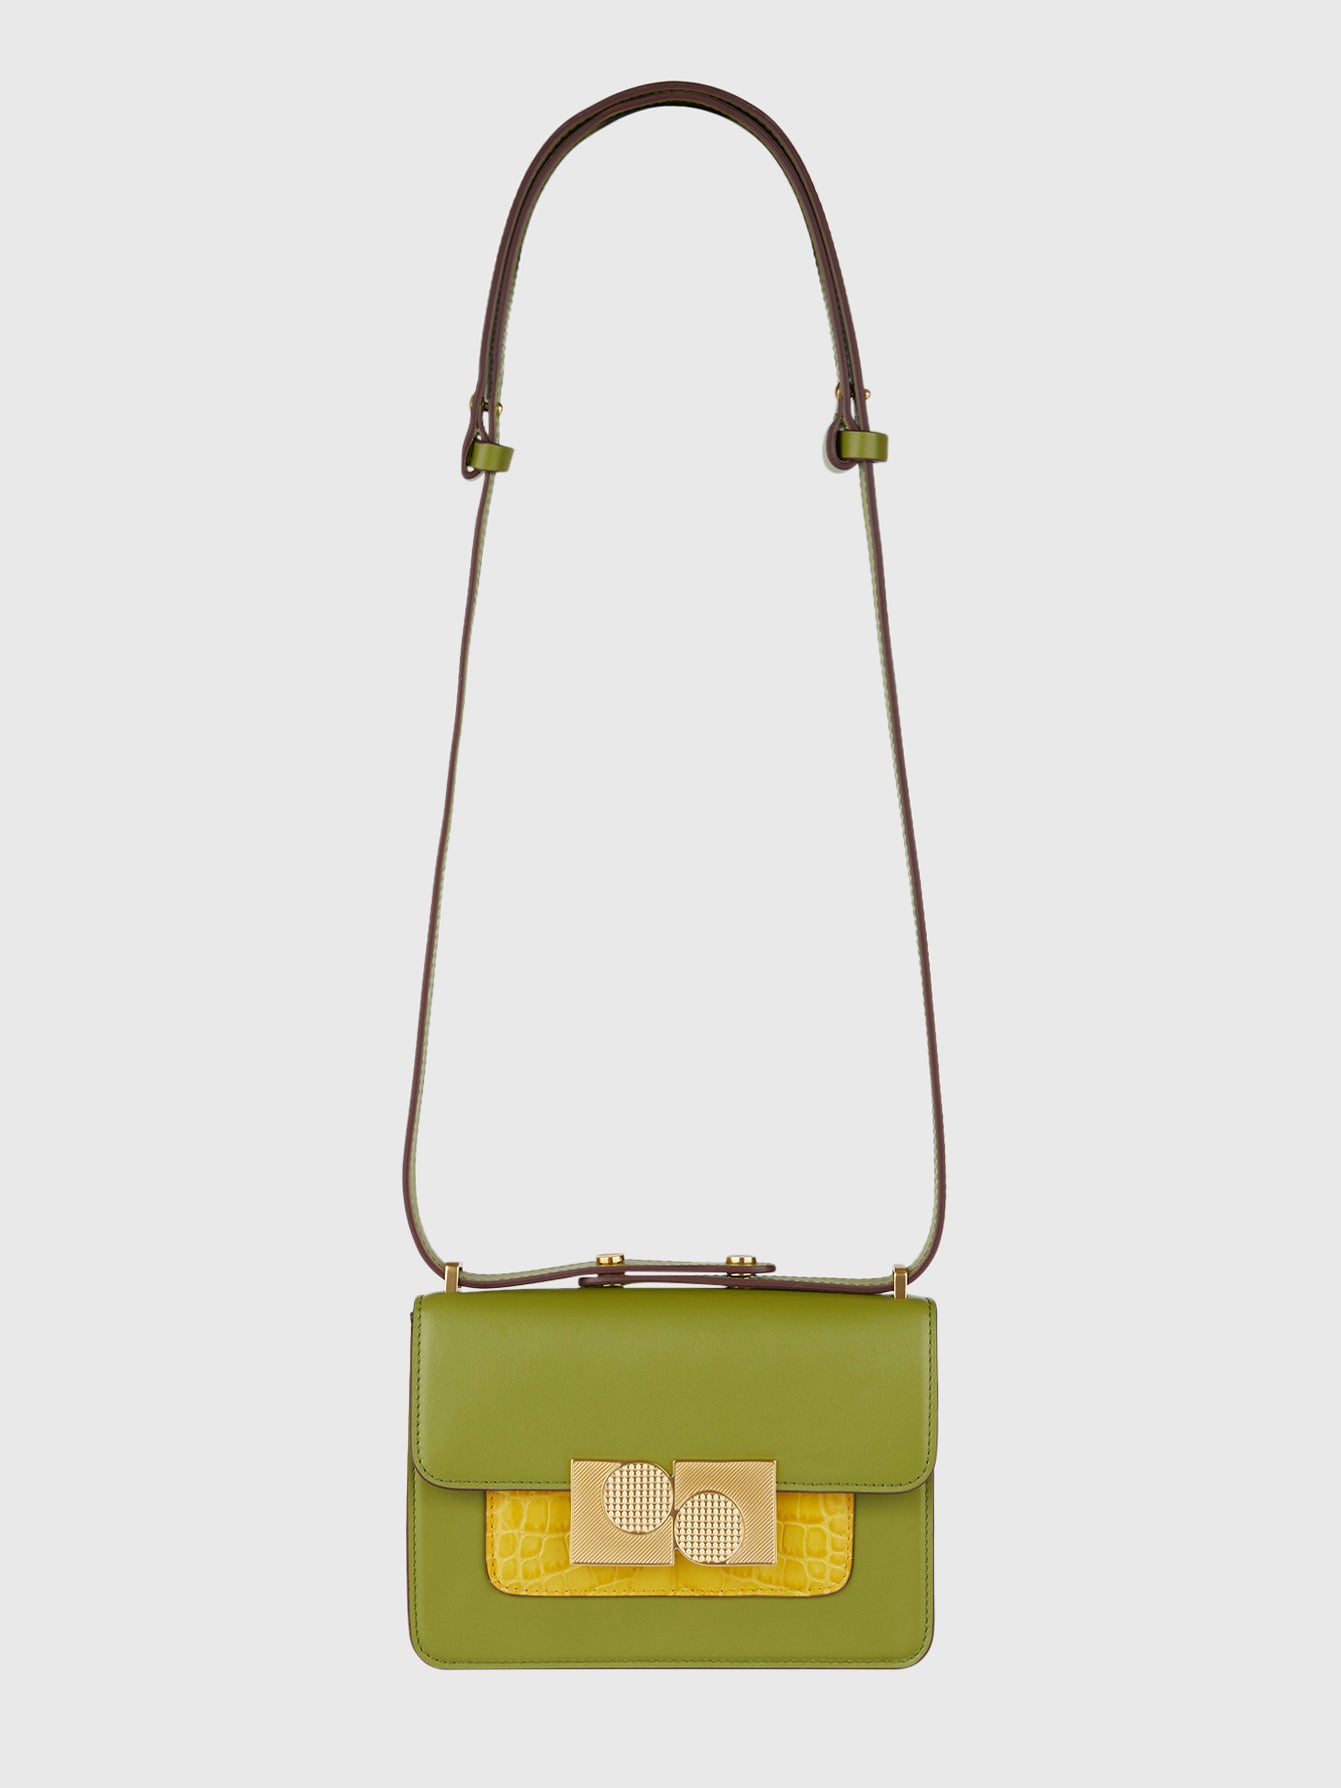 The Anika Bag In Green And Yellow